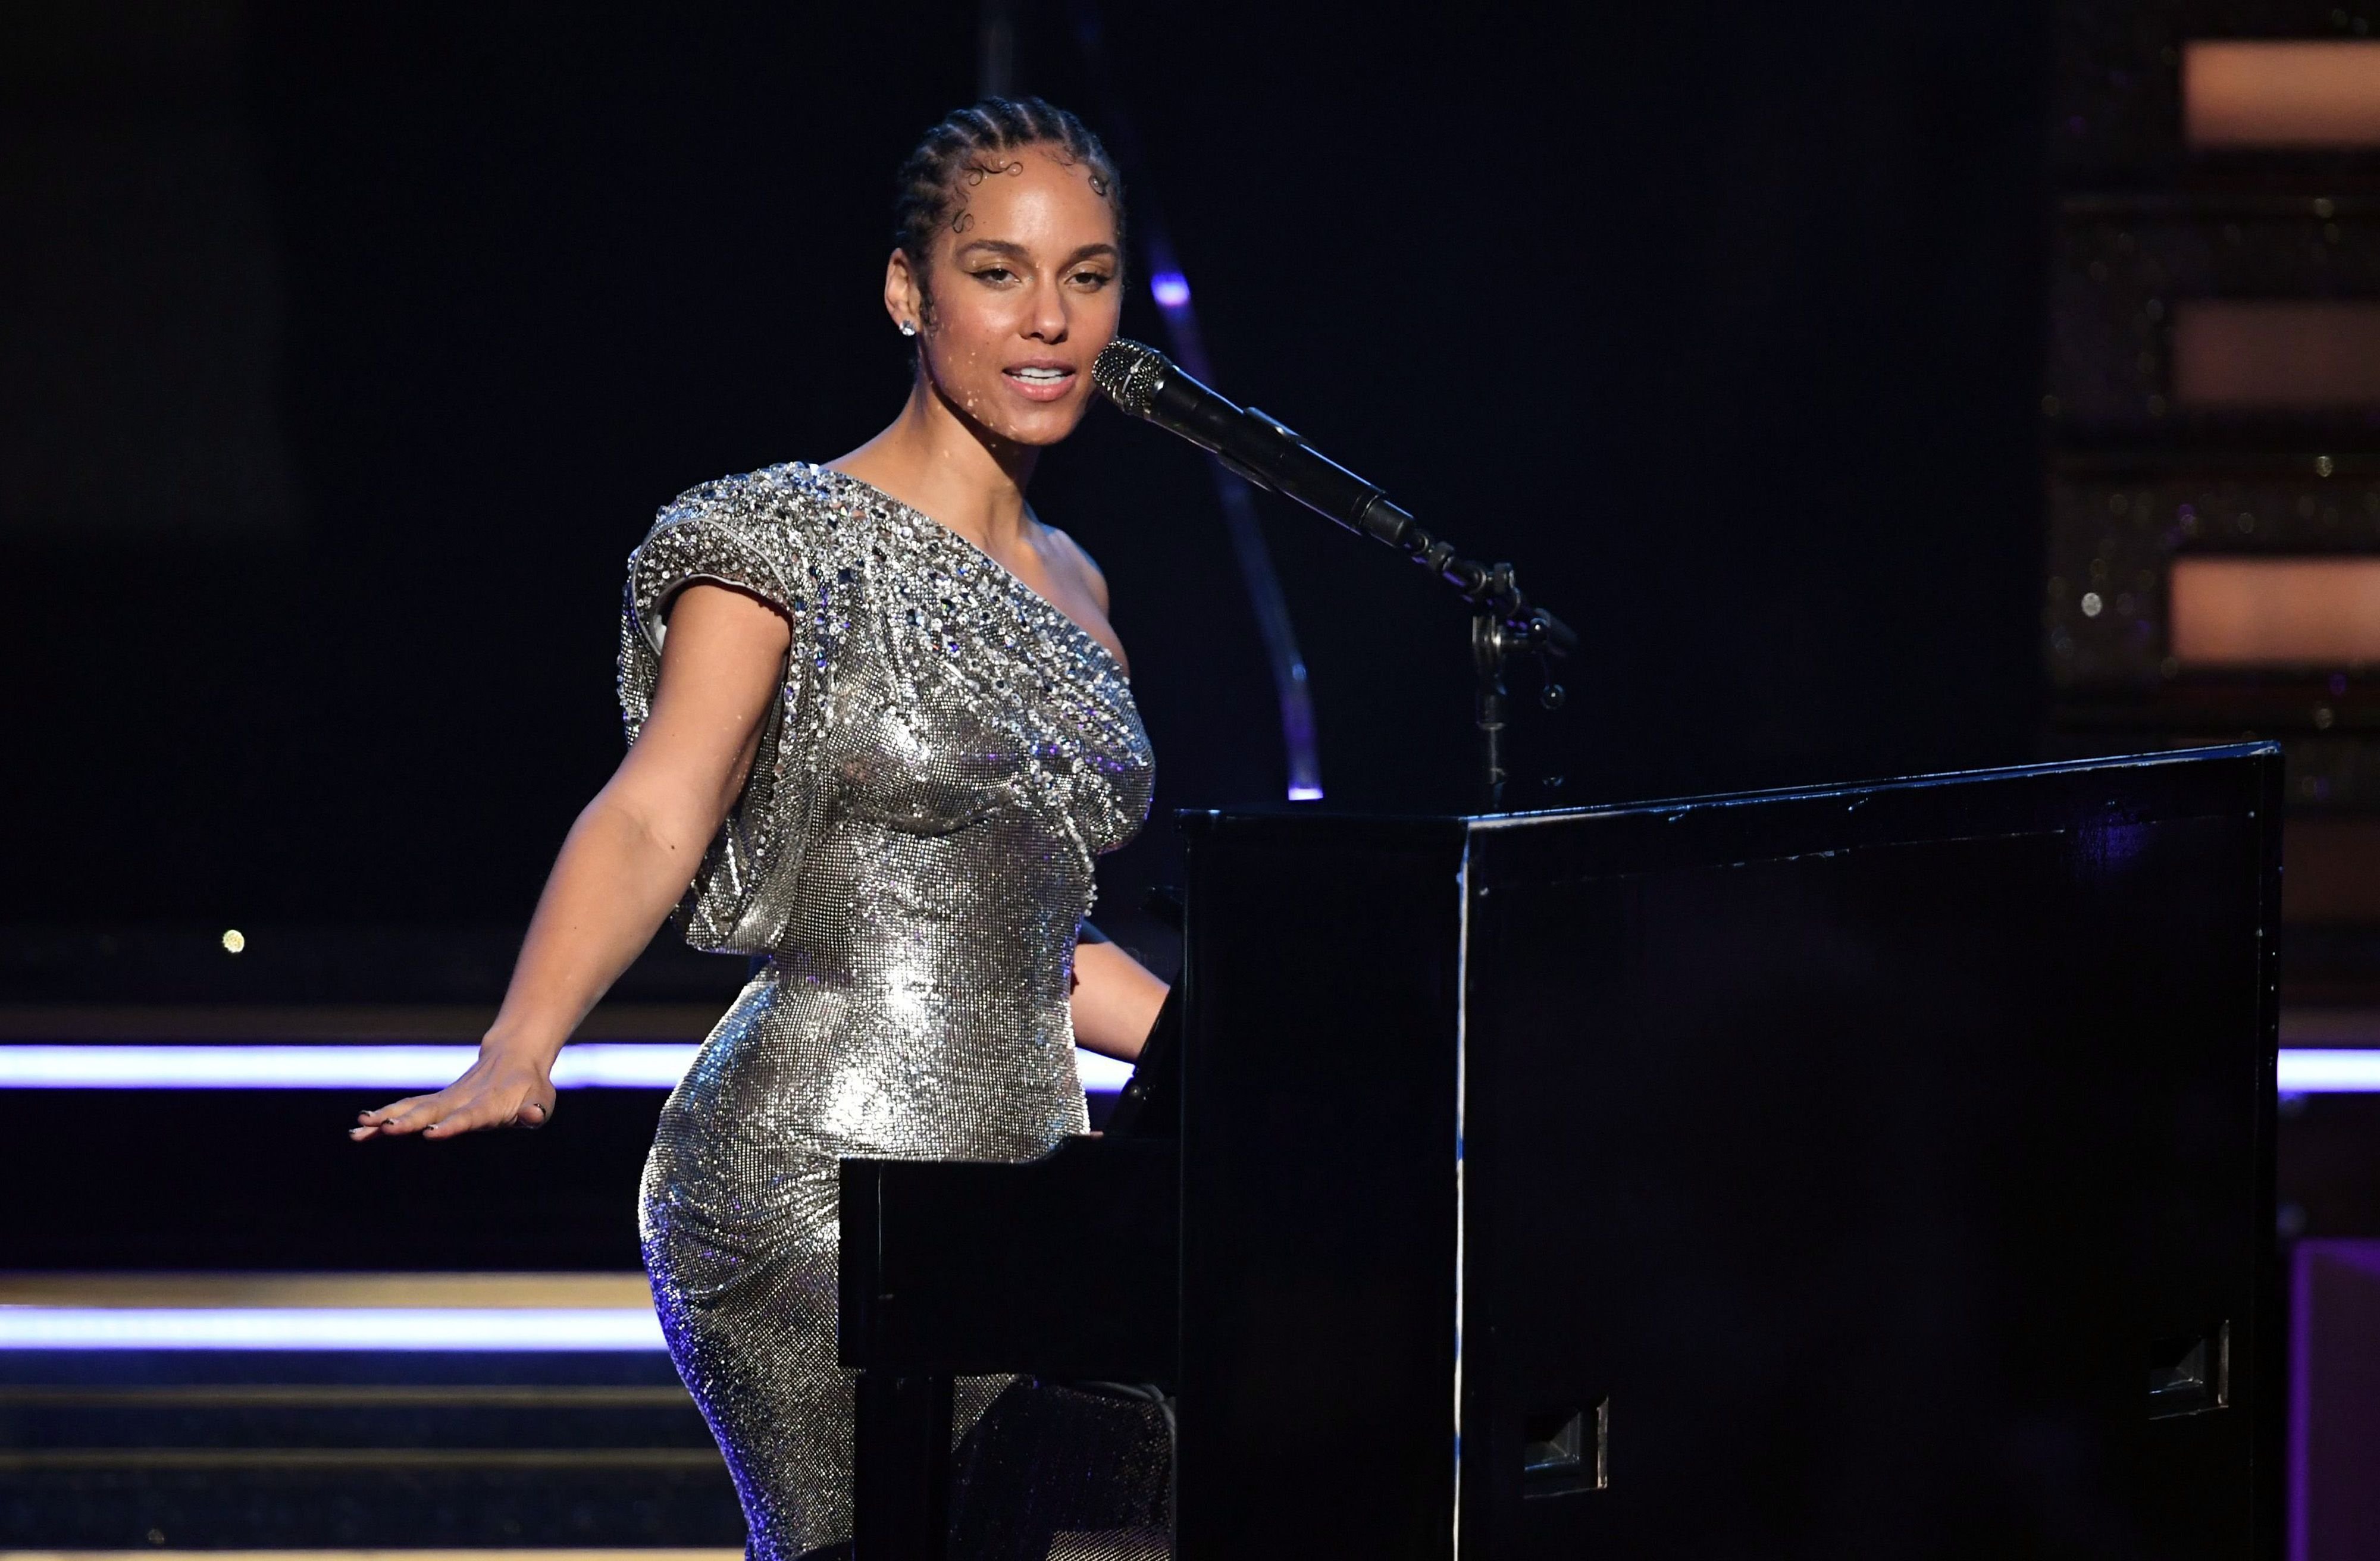 Alicia Keys at the 62nd Annual Grammy Awards on January 26, 2020/ Source: Getty Images